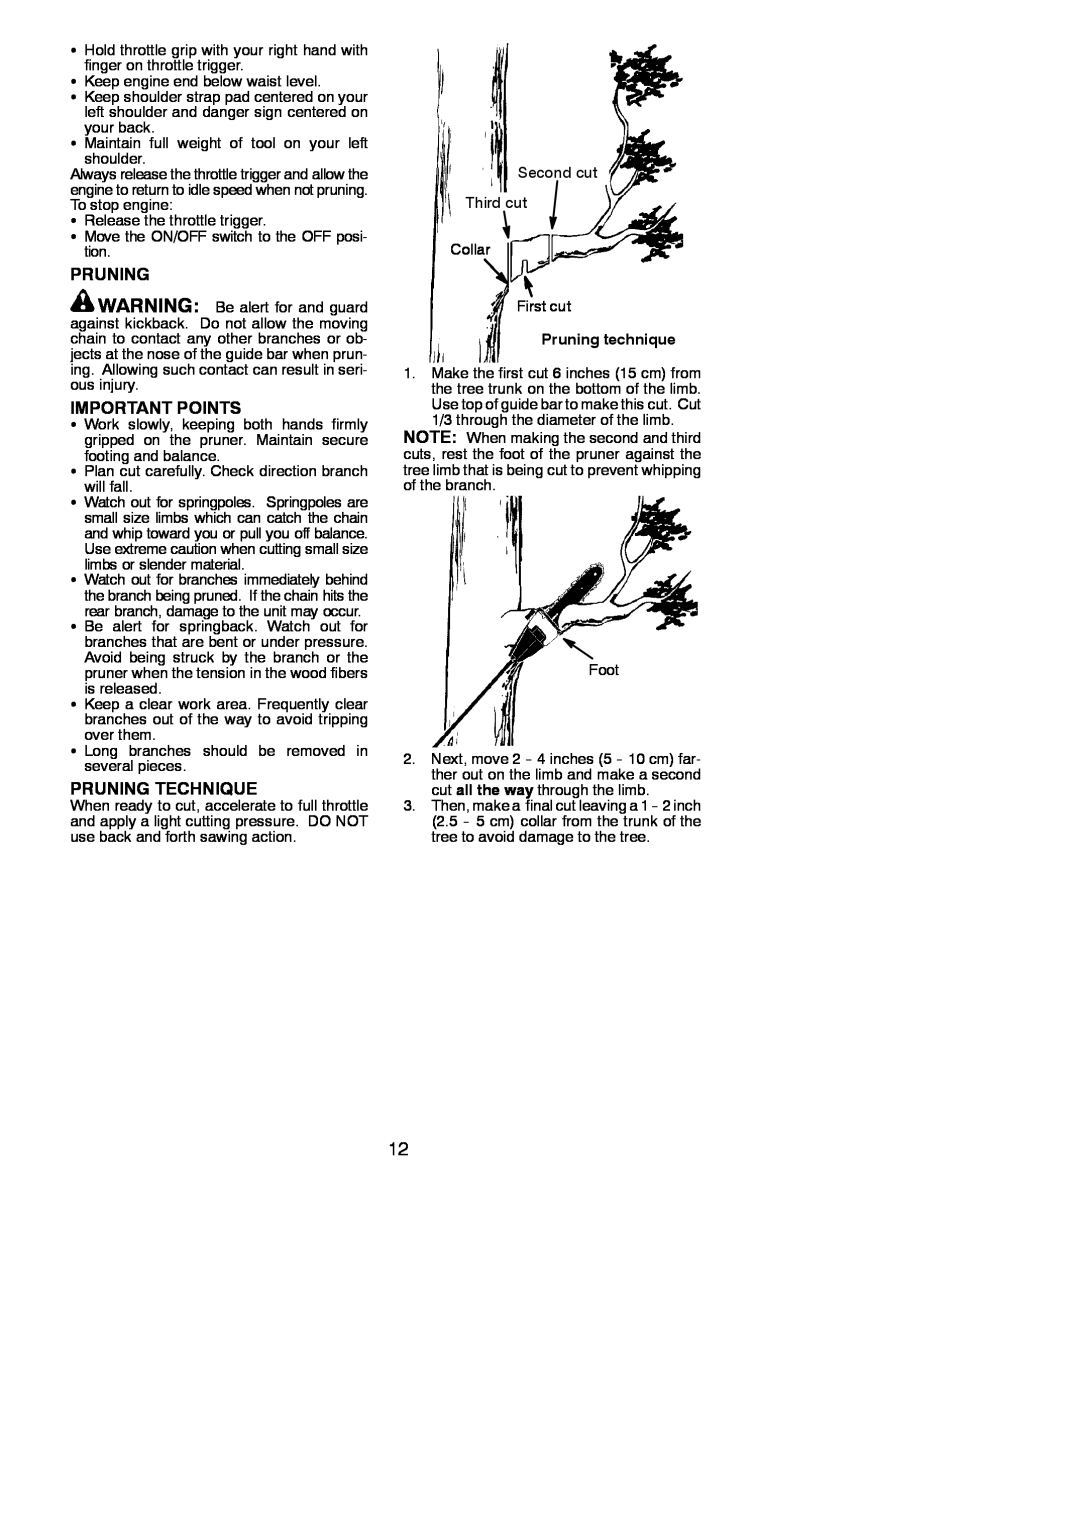 Poulan 545137281 instruction manual Important Points, Pruning Technique, Pruning technique 